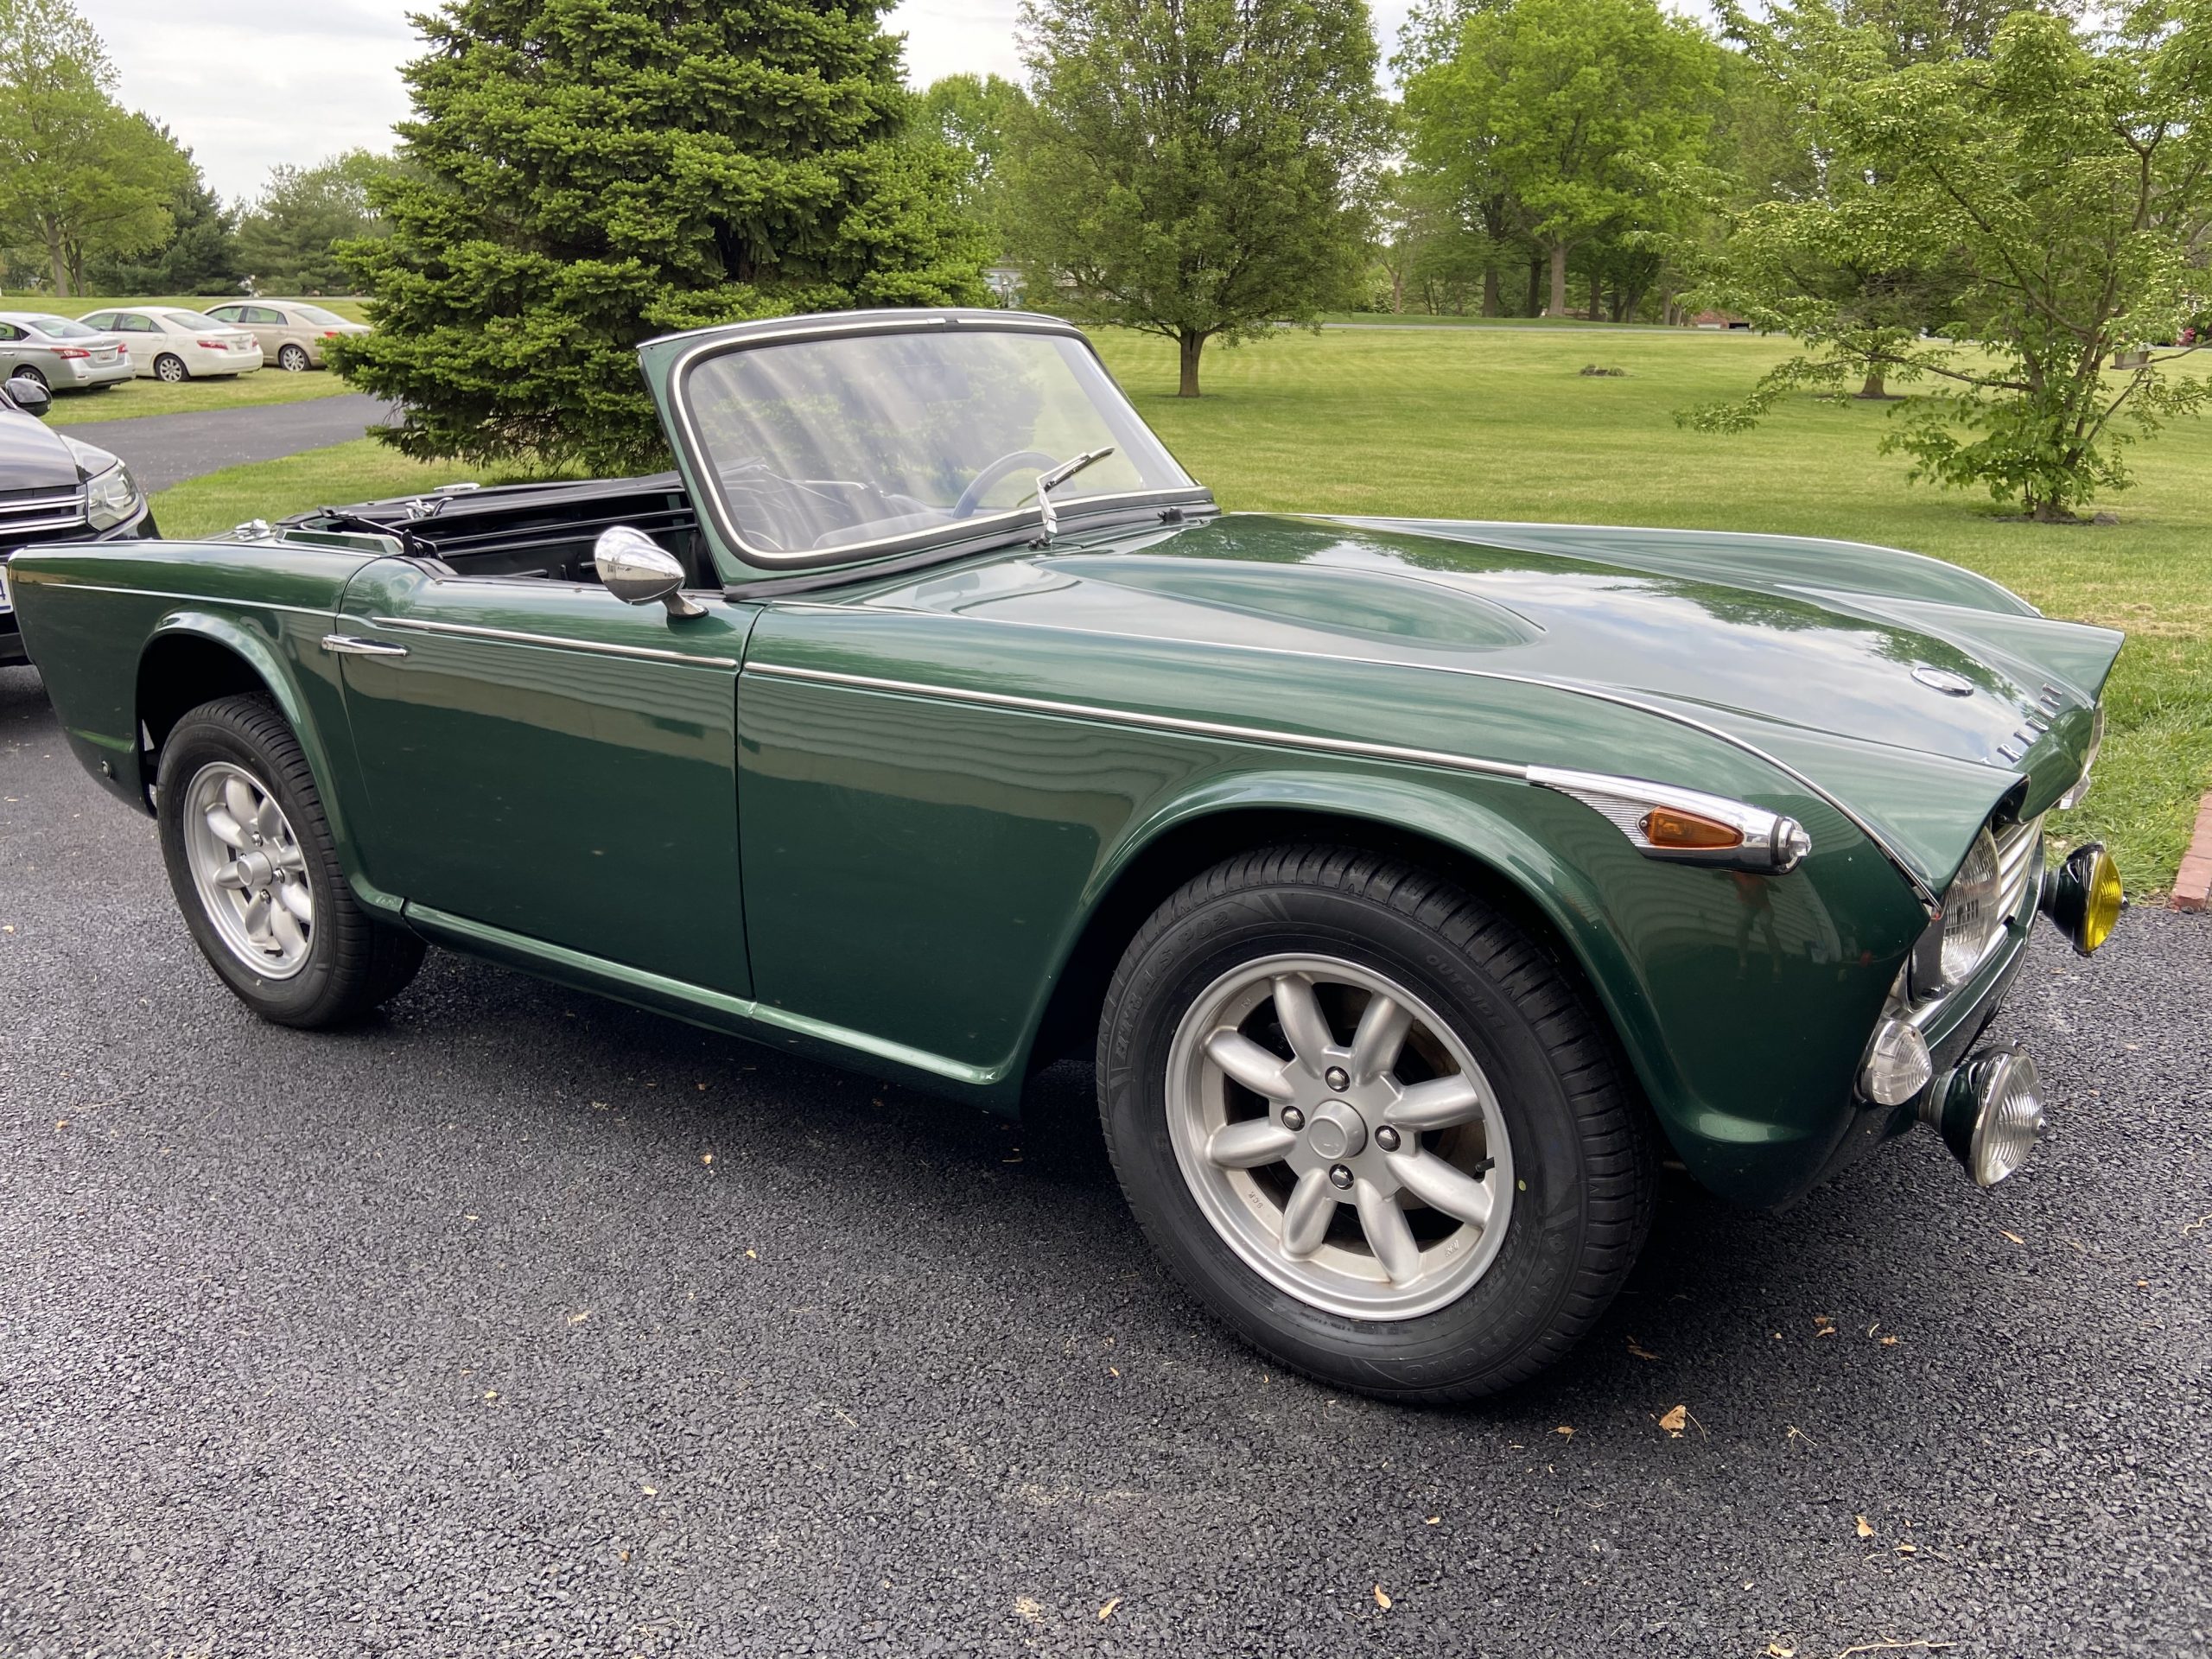 1965 Triumph TR4A - side view as restored in 2000